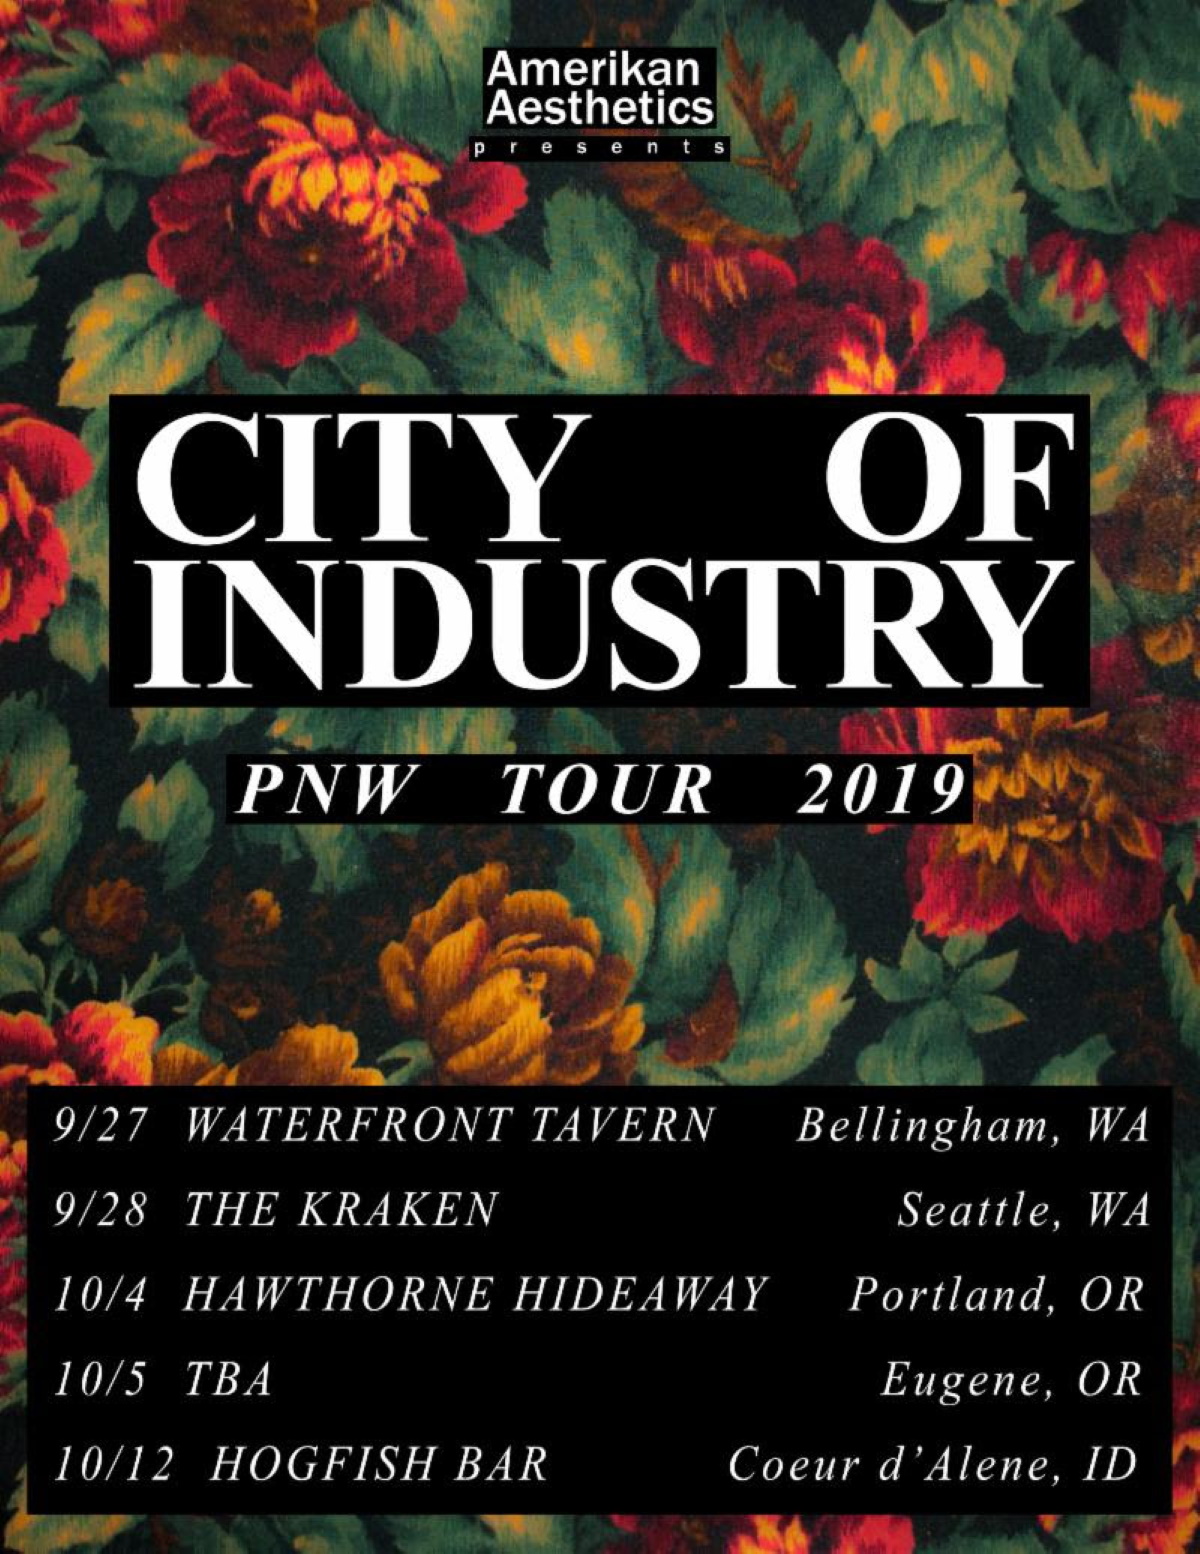 CITY OF INDUSTRY tour